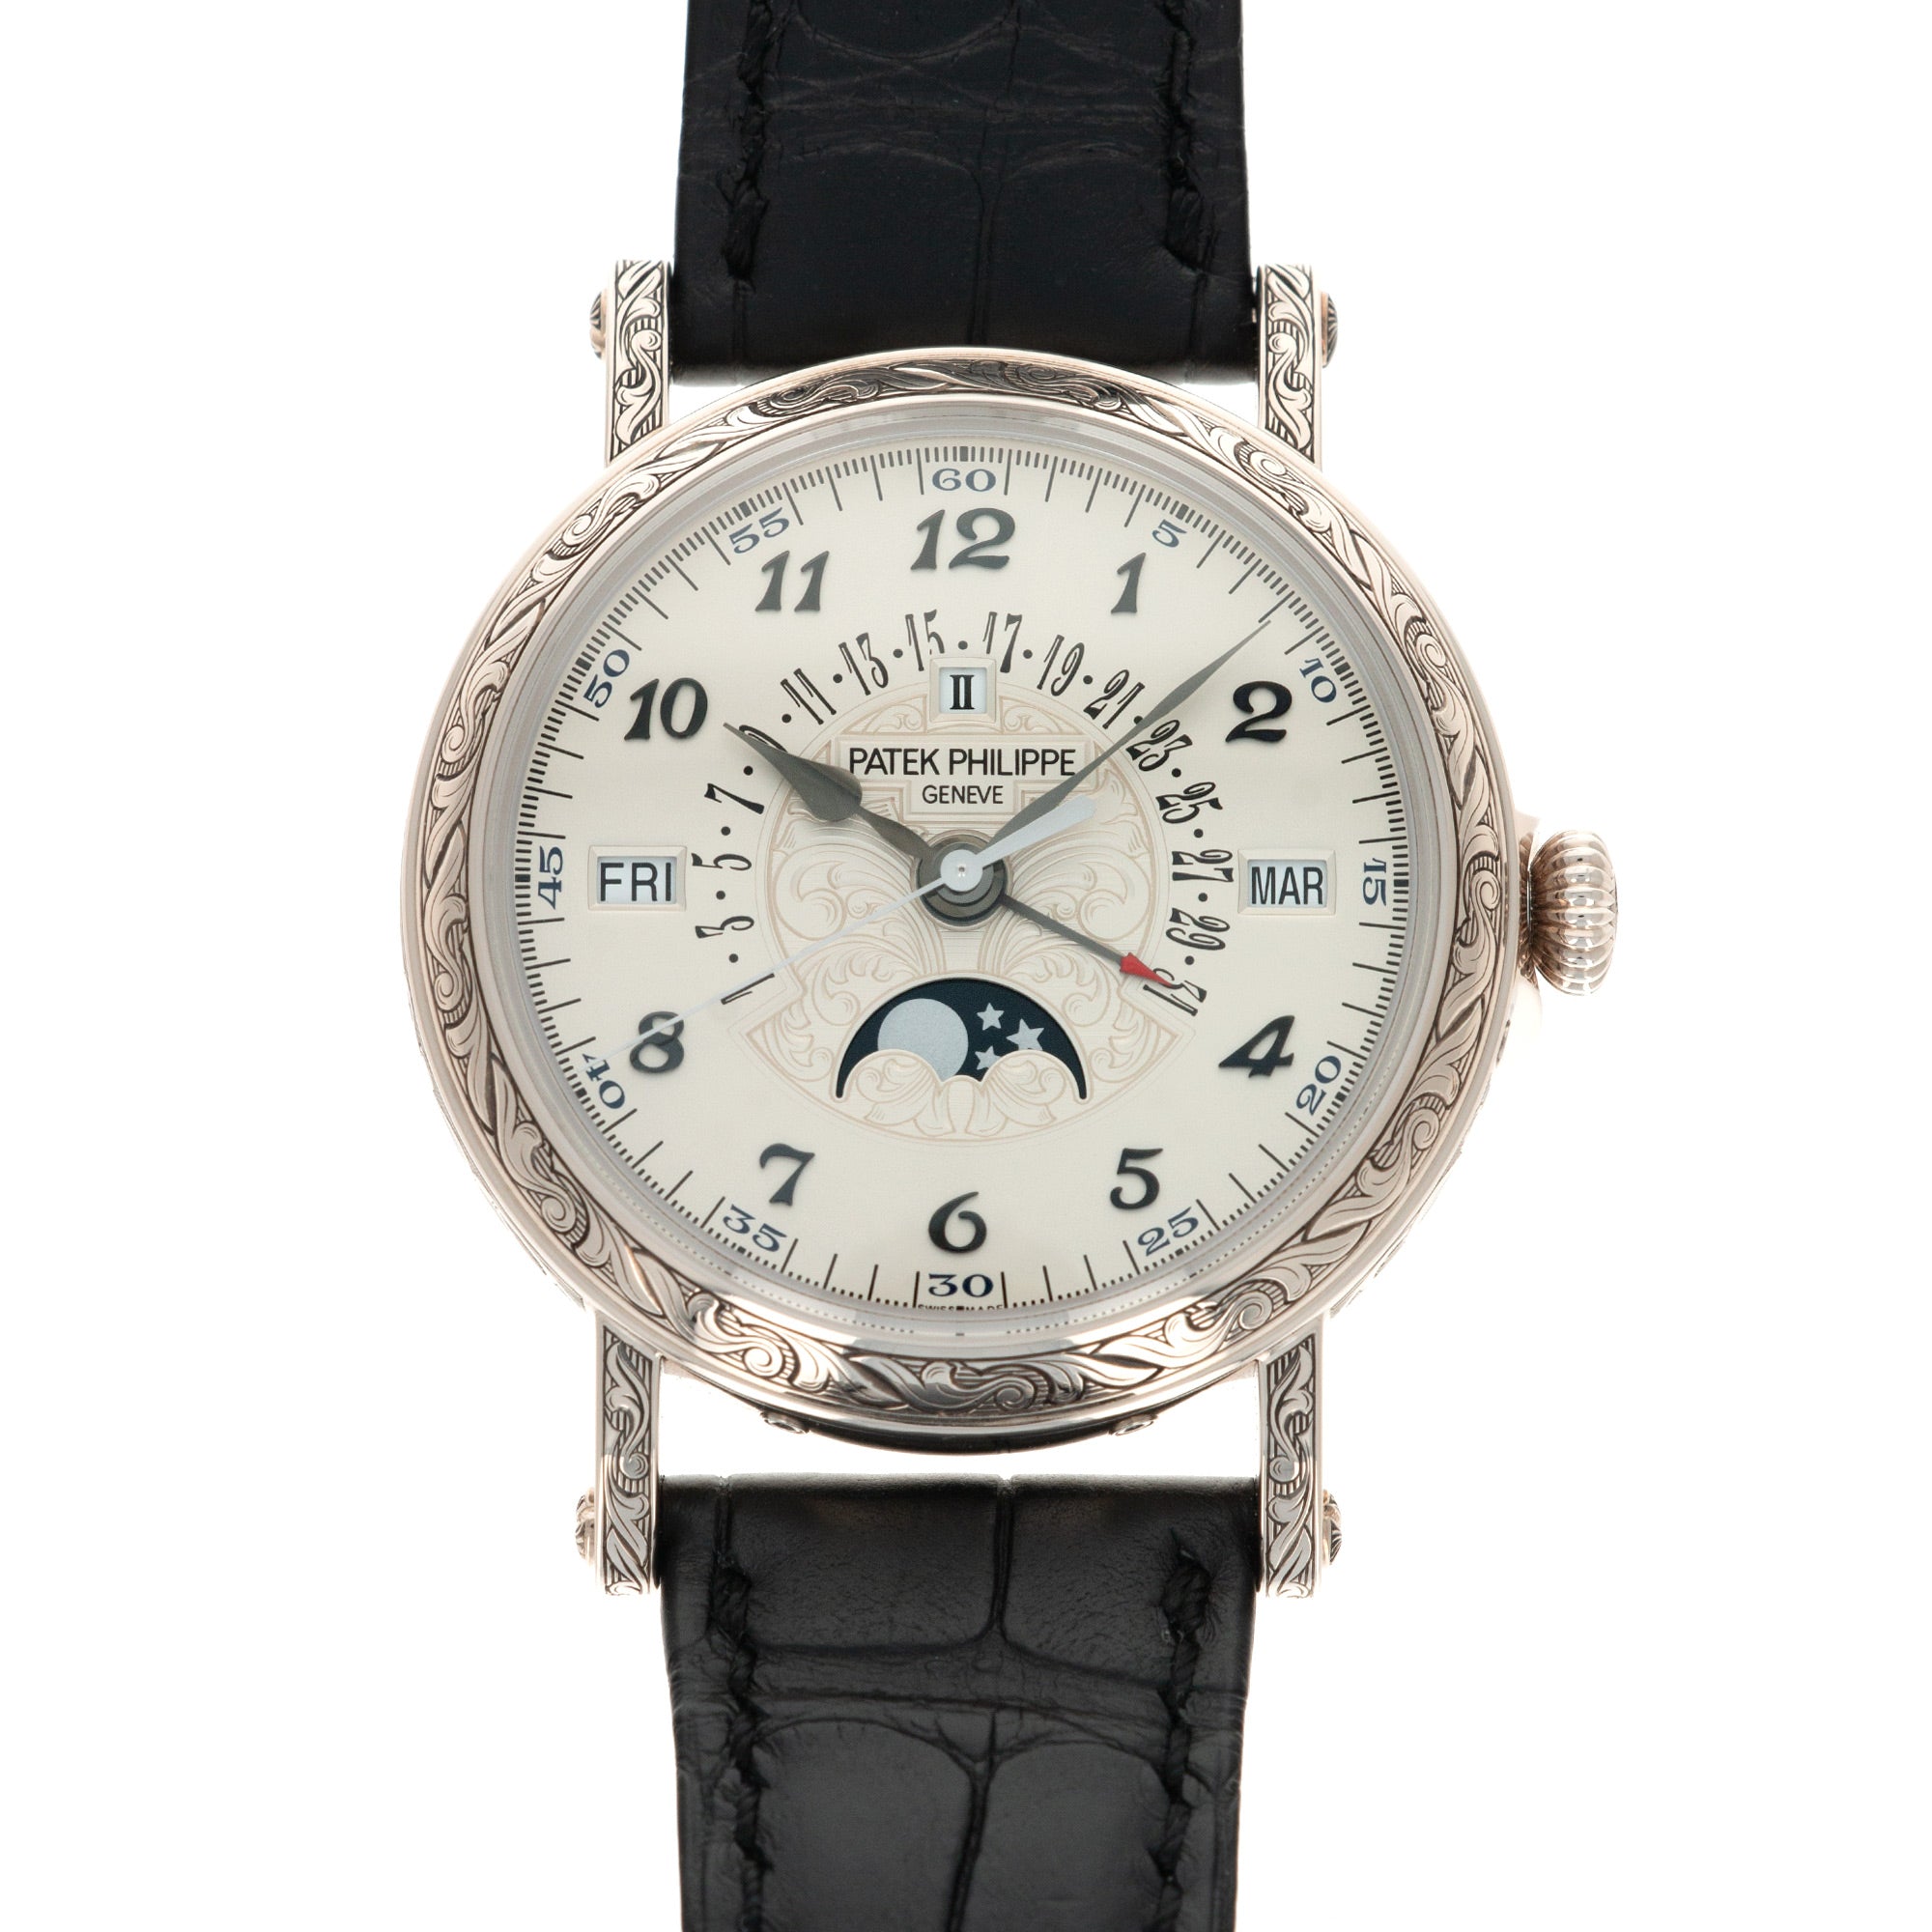 Patek Philippe - Patek Philippe White Gold Perpetual Calendar Watch Ref. 5160, Retailed by Tiffany & Co. - The Keystone Watches